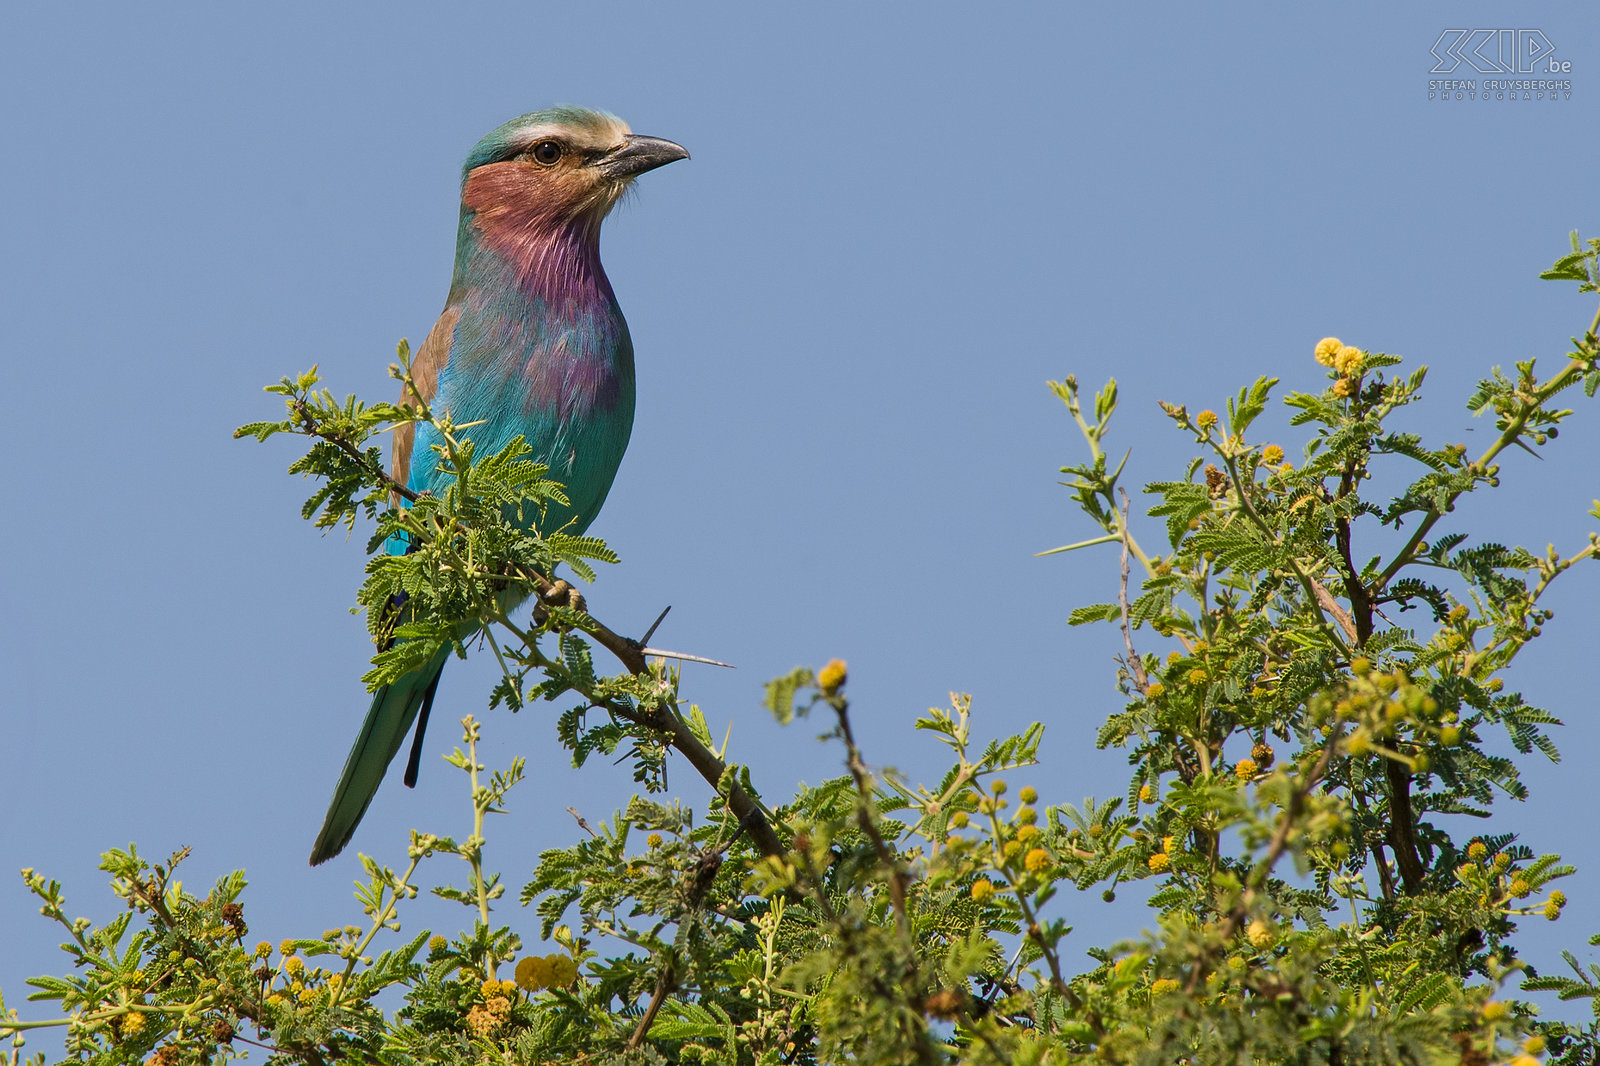 Nechisar - Lilac-breasted roller  I was able to take a close shot of this beautiful Lilac-breasted roller (Coracias caudatus). Stefan Cruysberghs